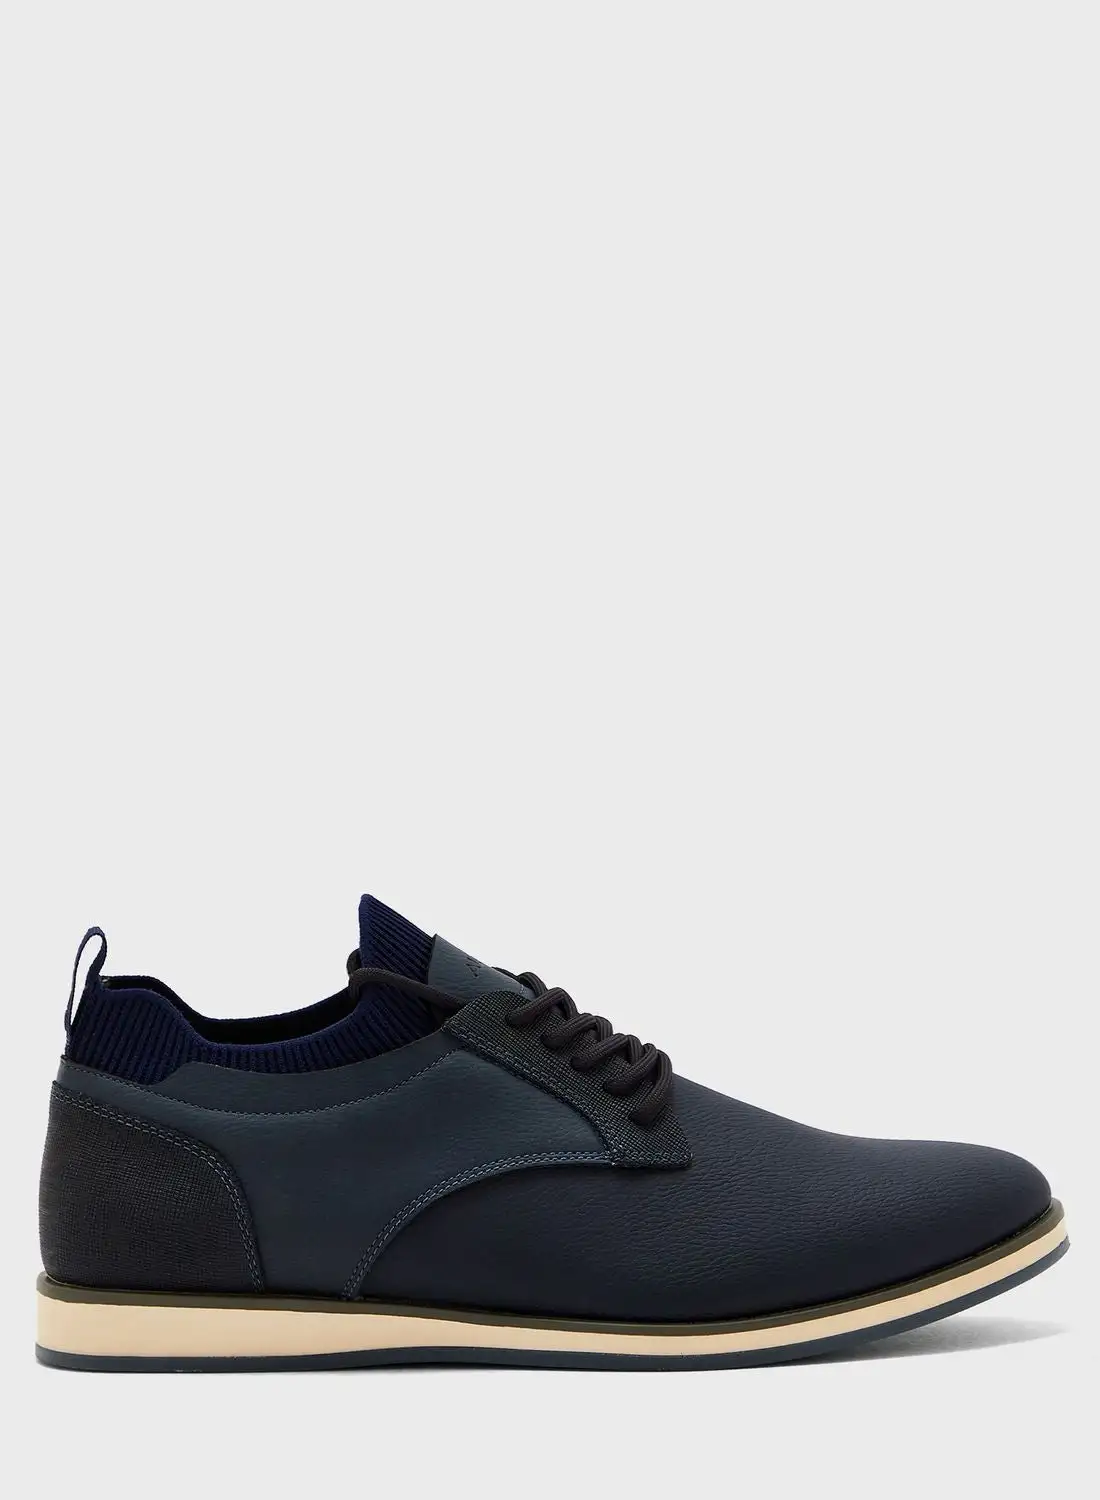 ALDO Gladosen Lace Up Low Top Sneakers